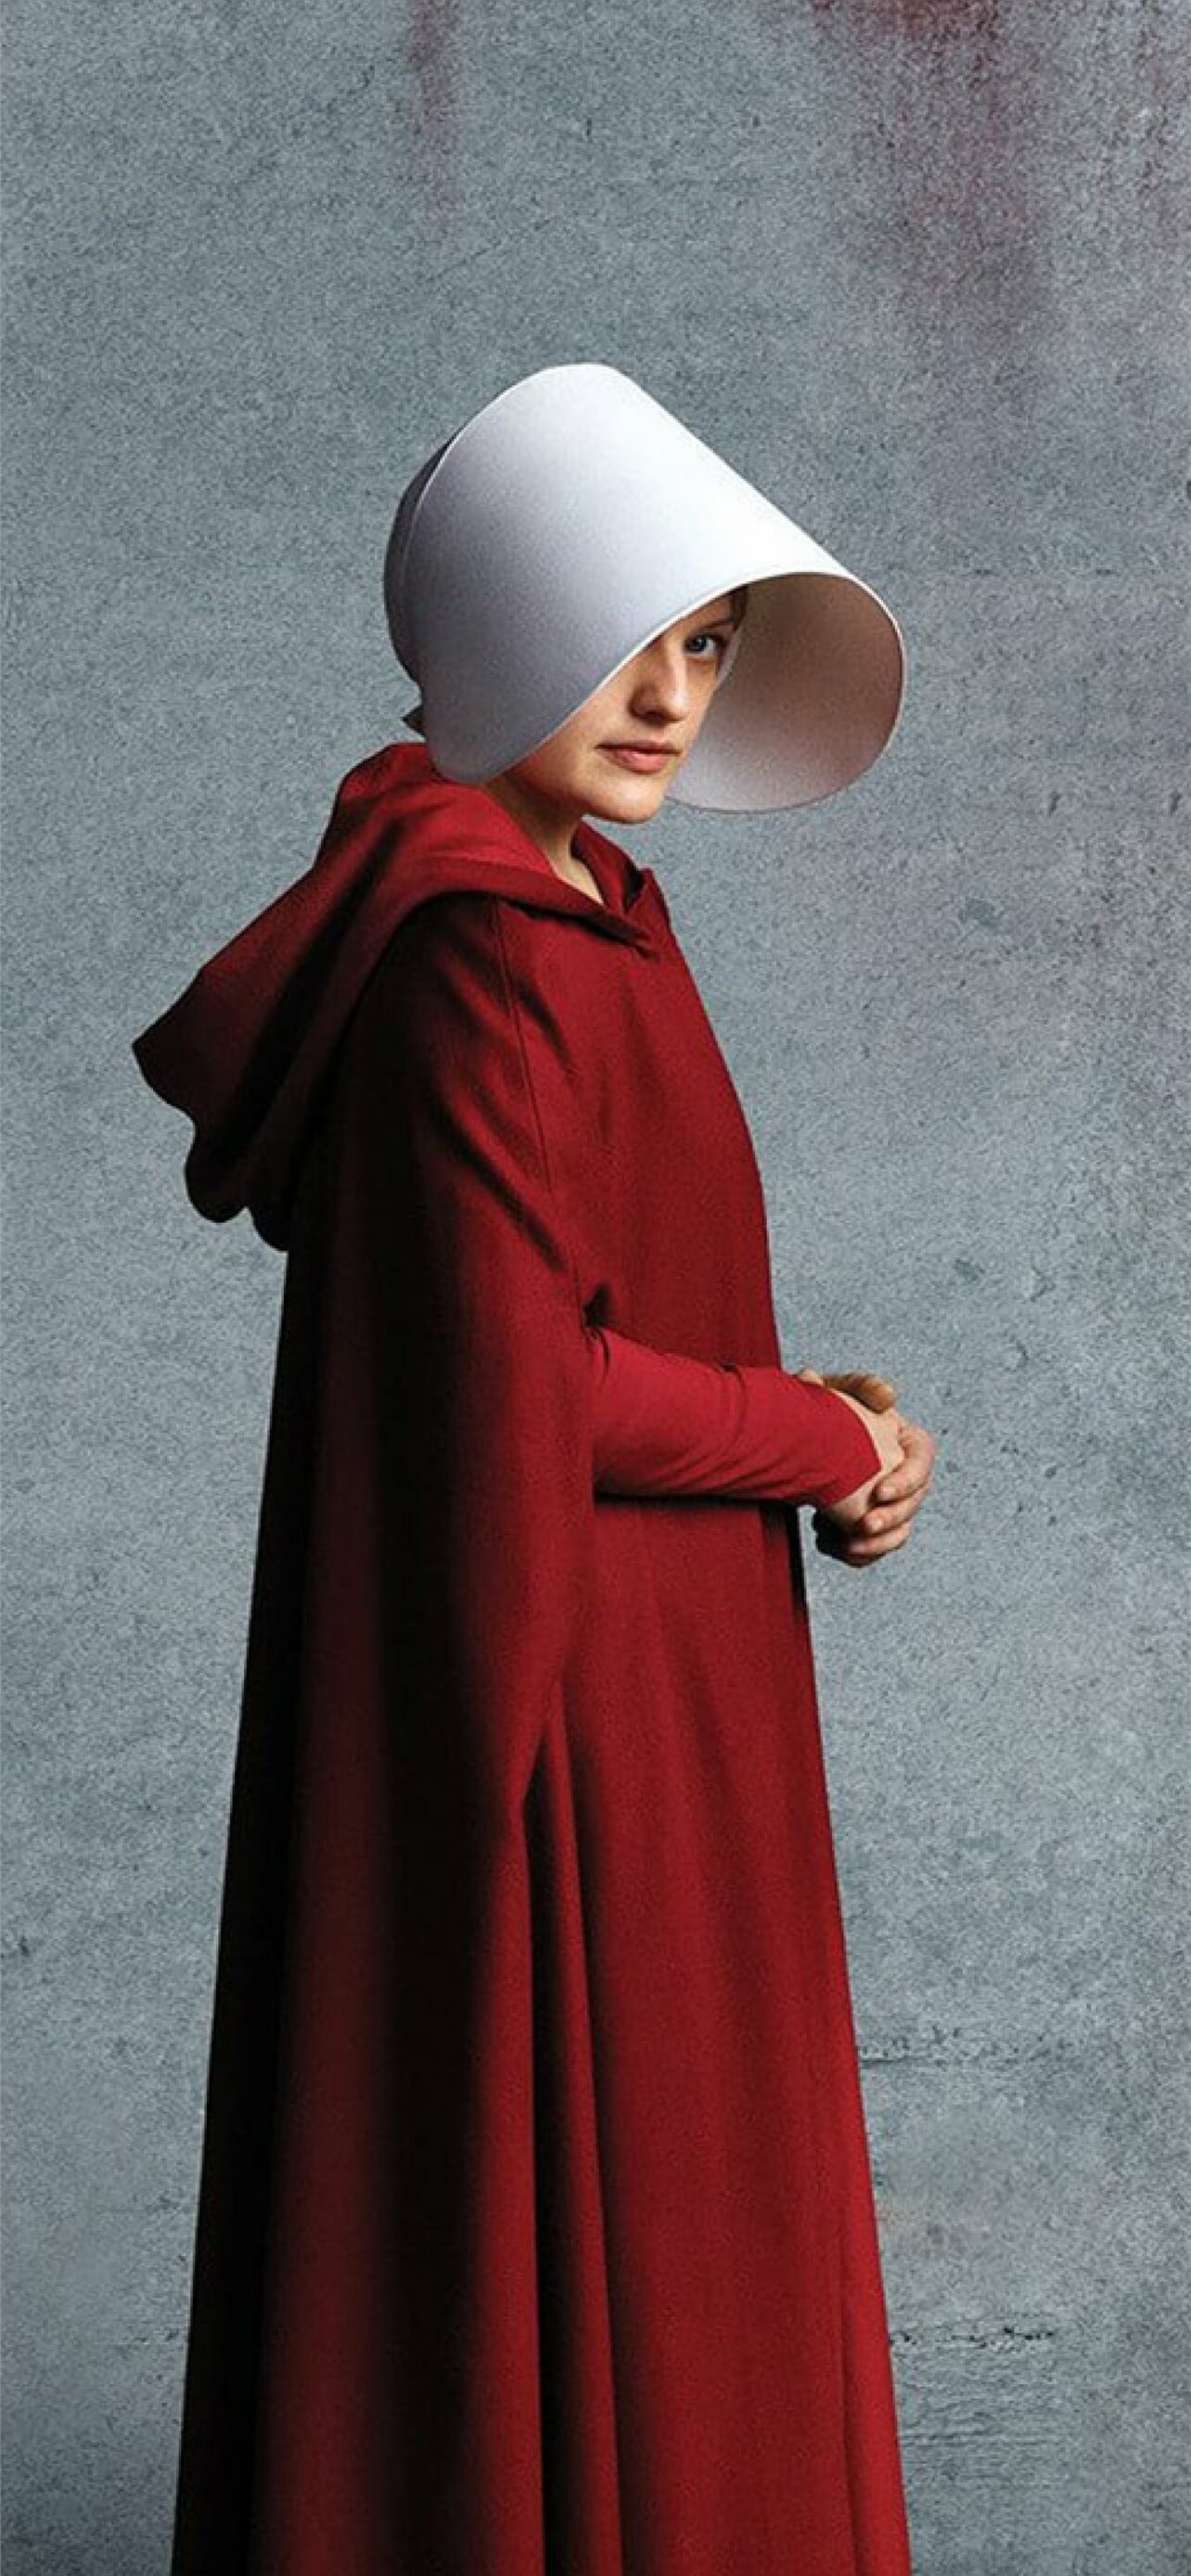 The Handmaid's Tale: An American dystopian television series created by Bruce Miller, Offred. 1290x2780 HD Wallpaper.